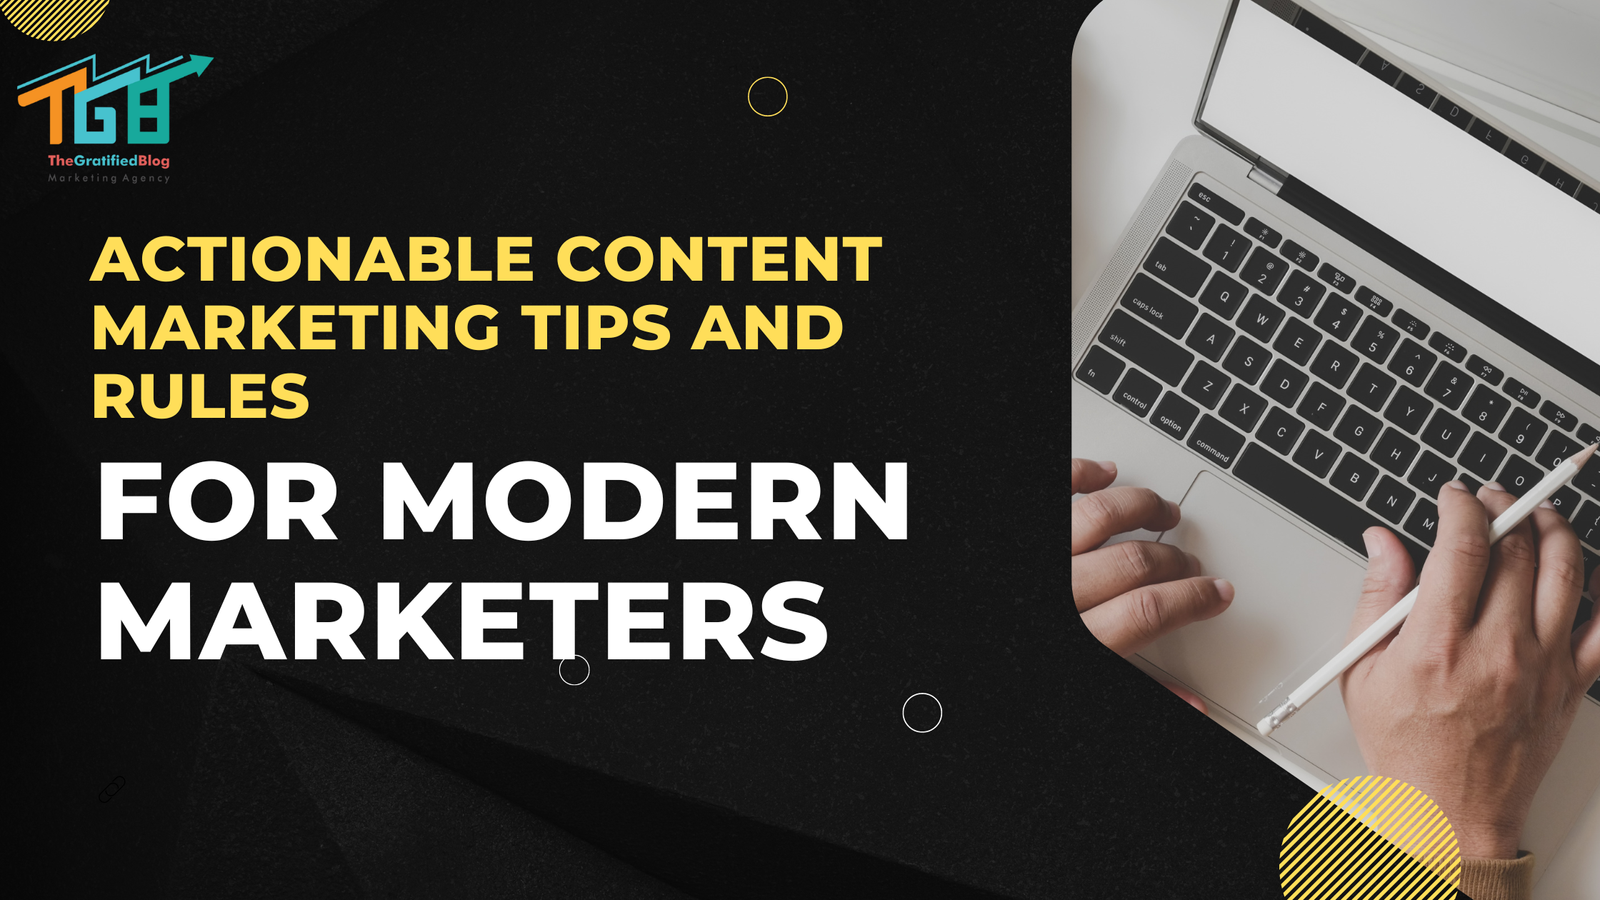 Actionable Content Marketing Tips And Rules For Modern Marketers